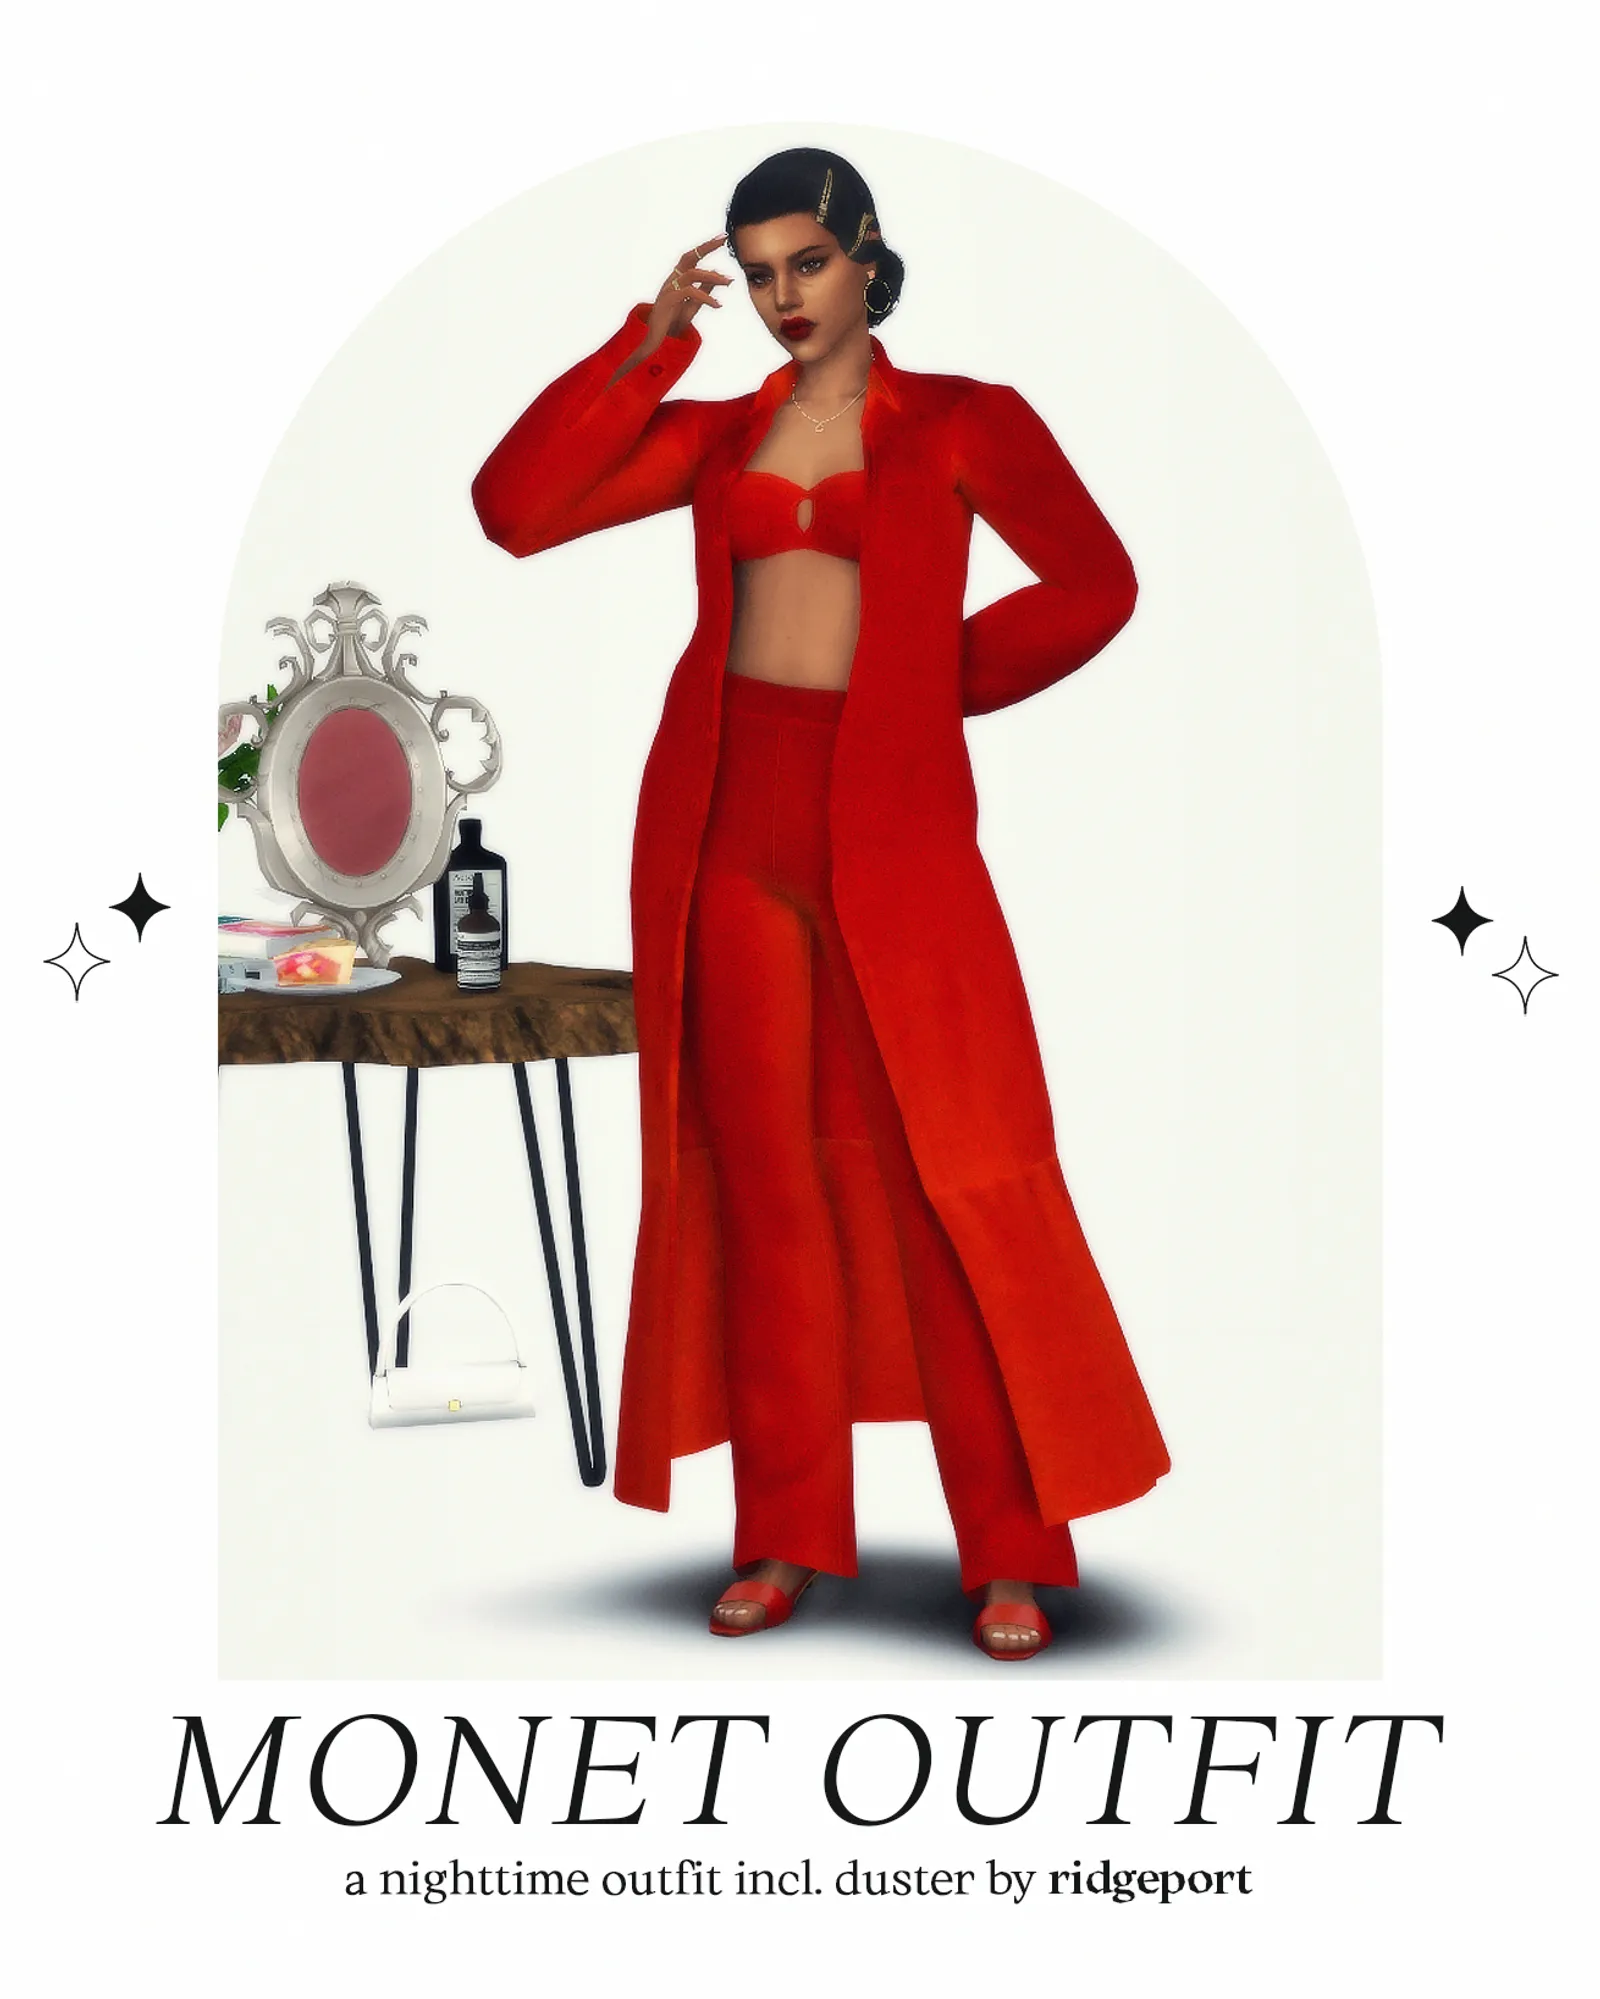 monet outfit ·